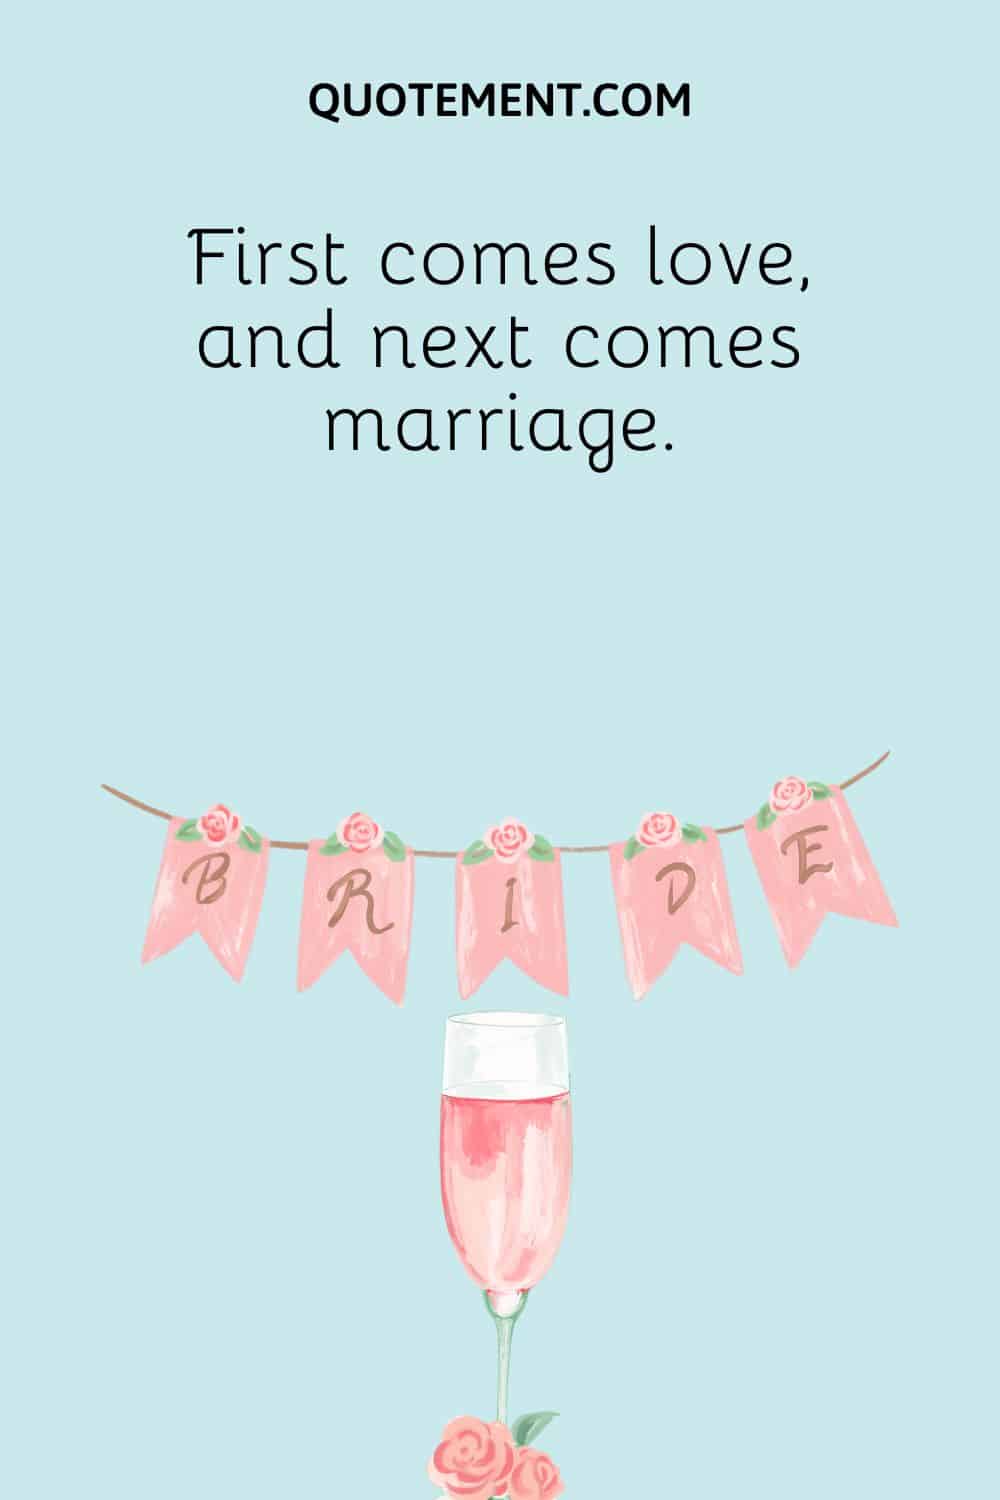 First comes love, and next comes marriage.